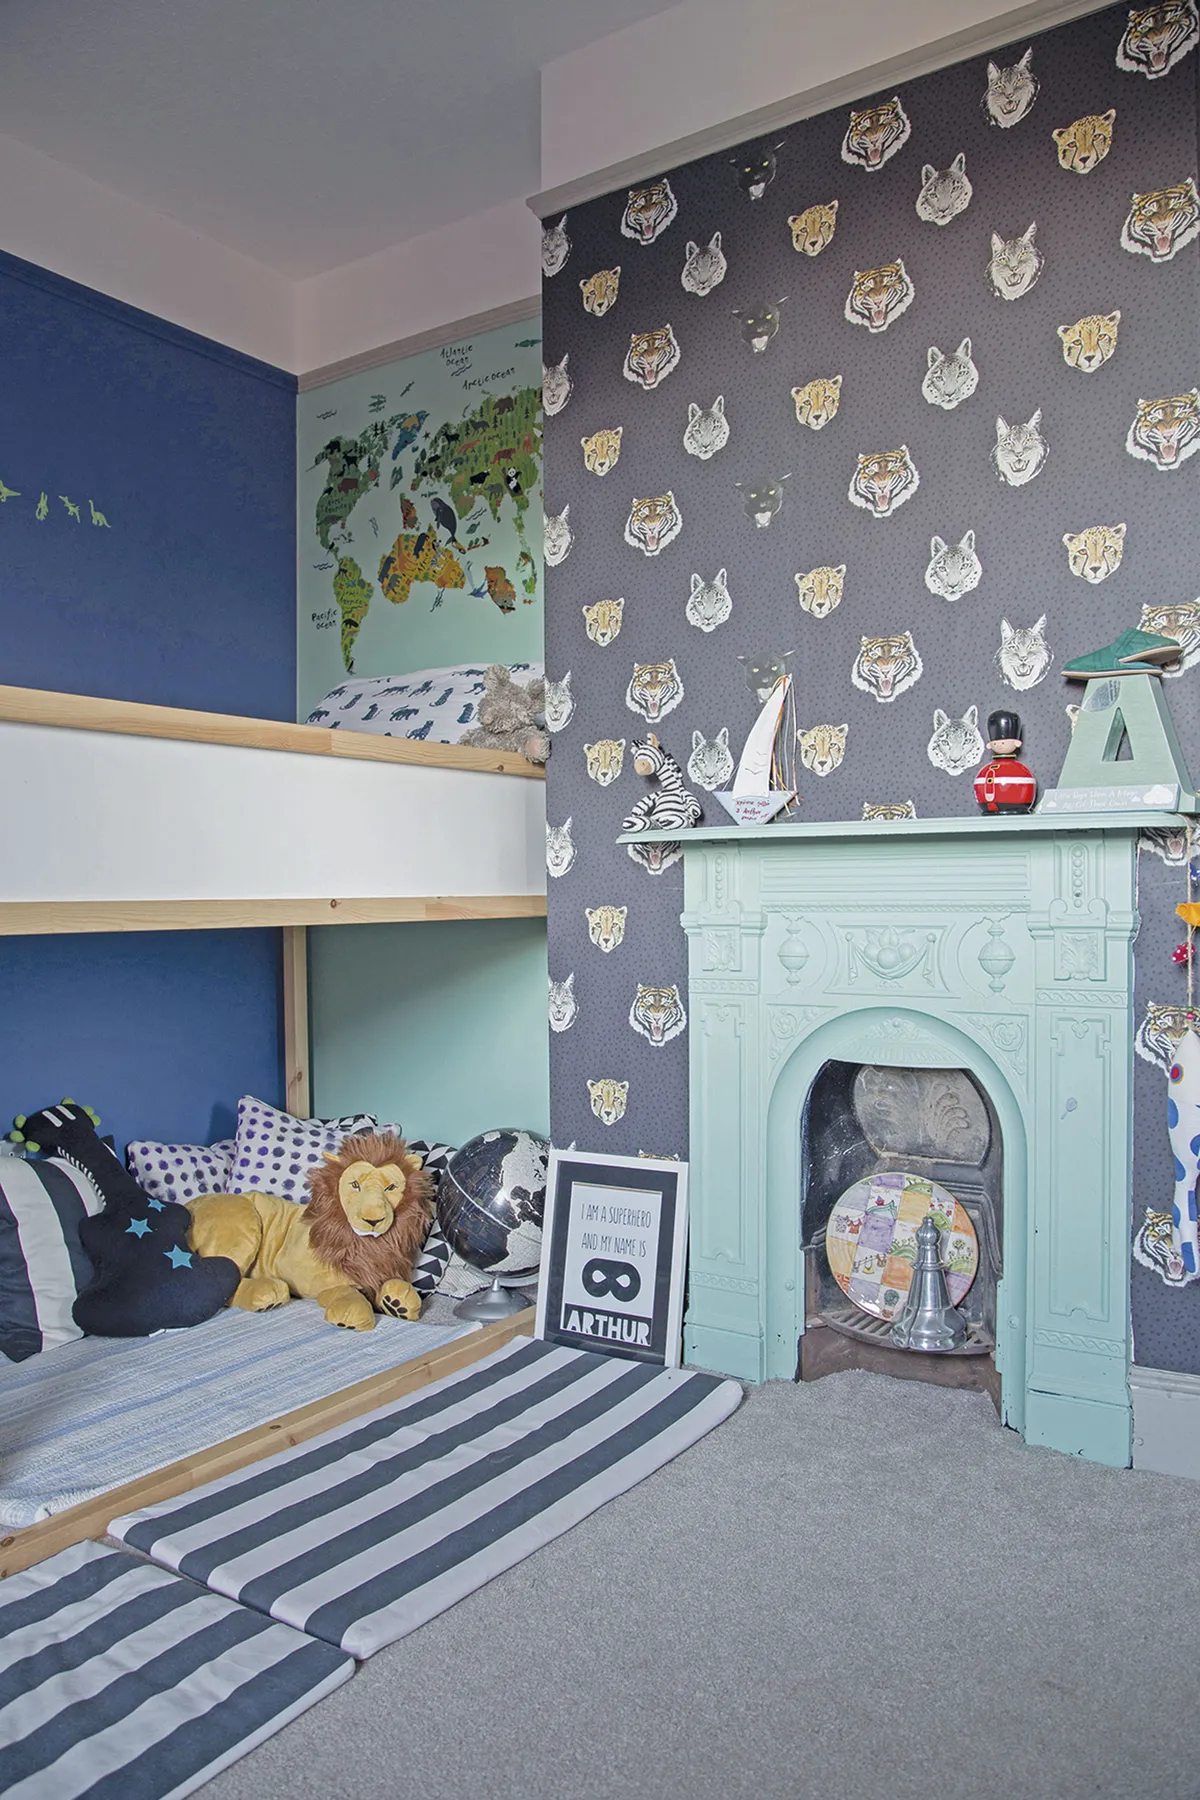 Megan involved Arthur in the design of his bedroom by allowing him to choose the wallpaper. The animal head motifs paired with dark and aqua blue wall paints create a smart, yet fun scheme